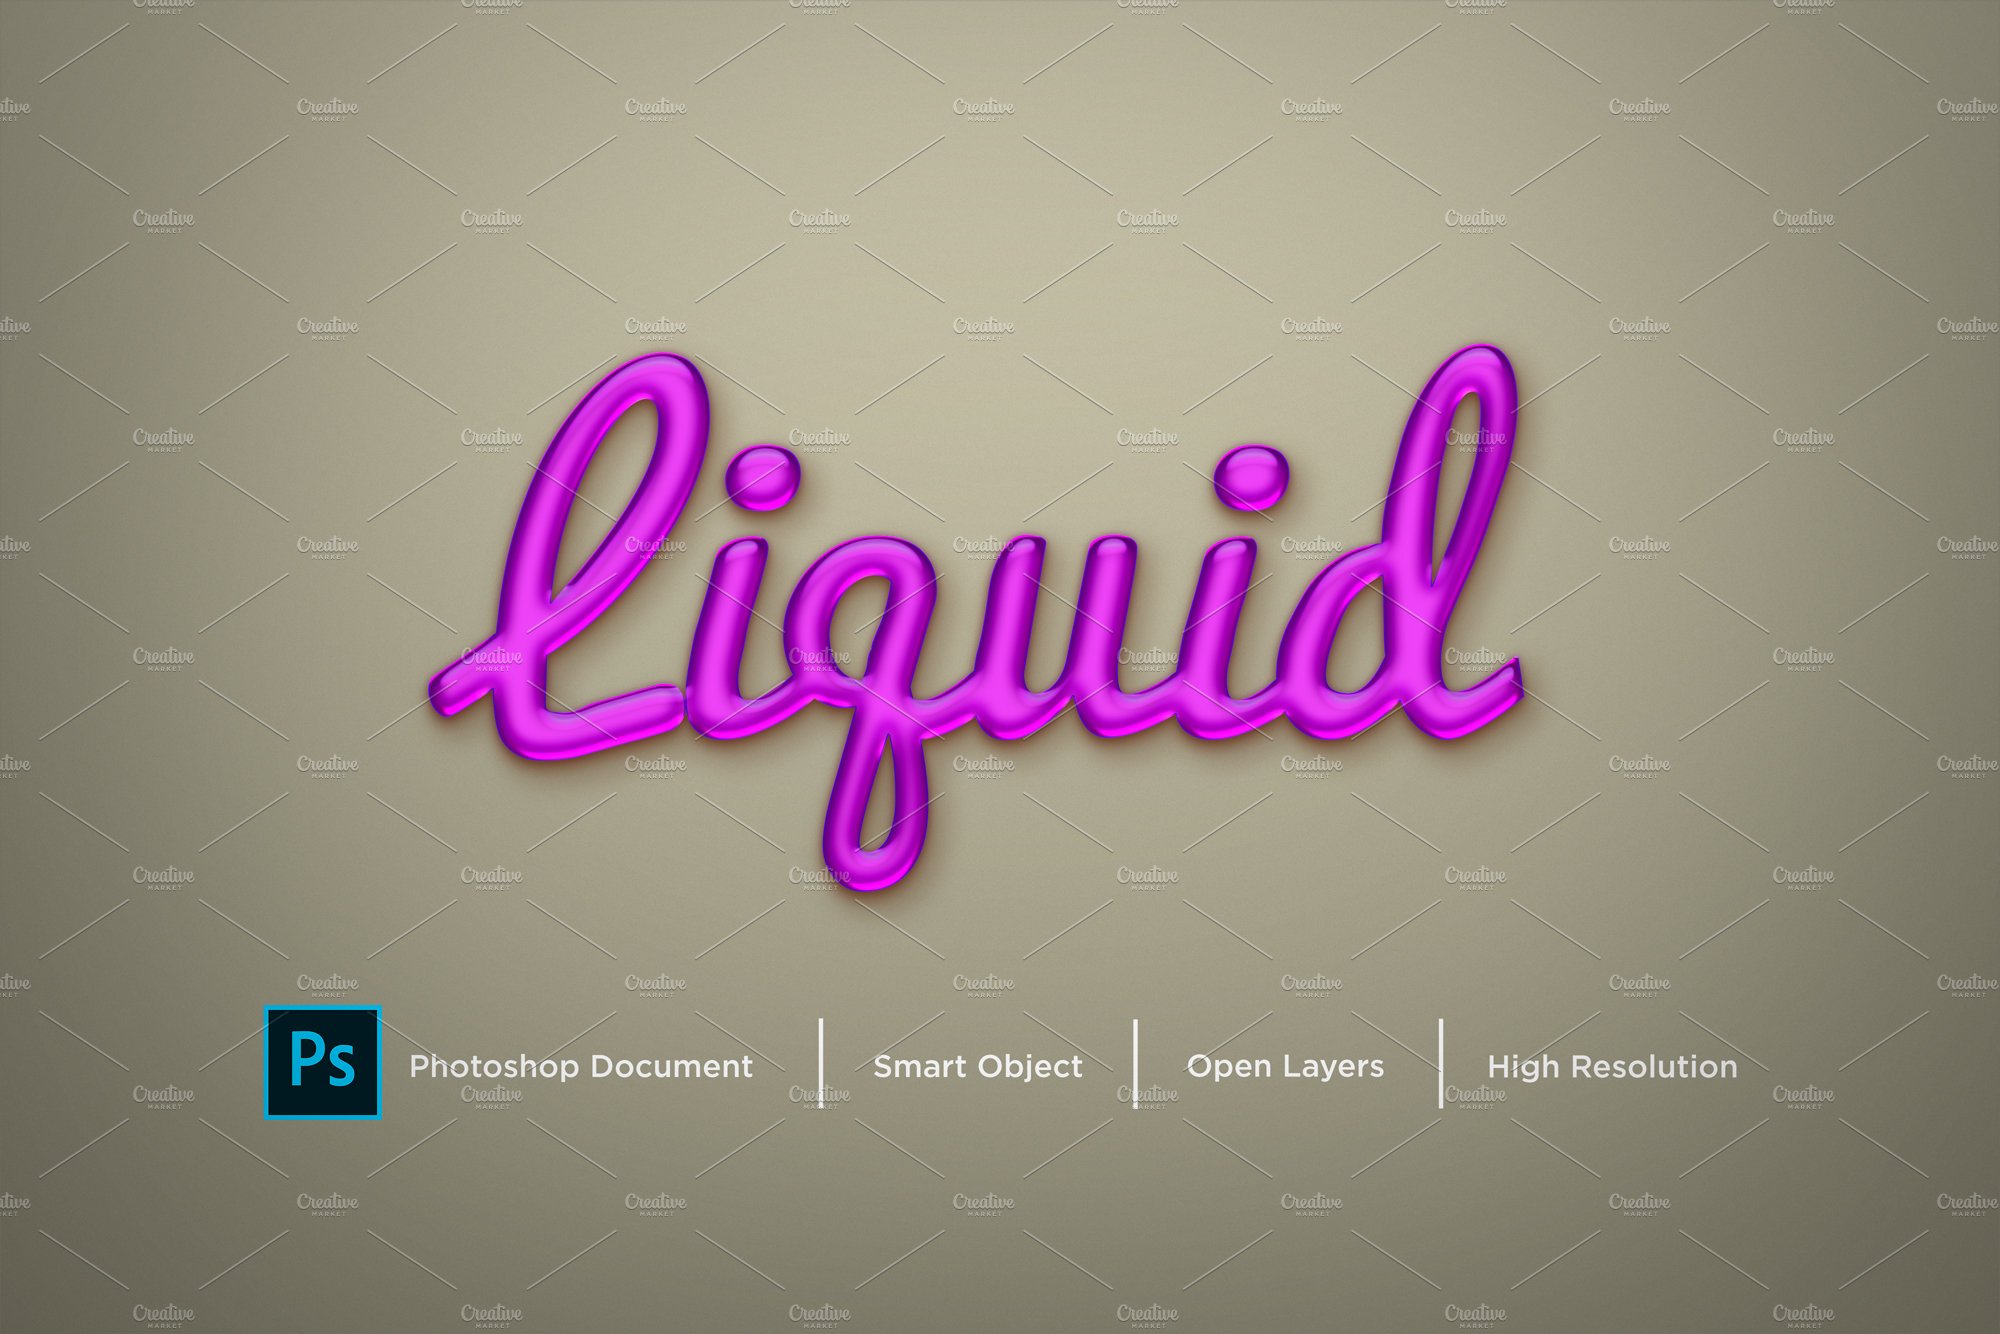 Liquid Text Effect & Layer Stylecover image.